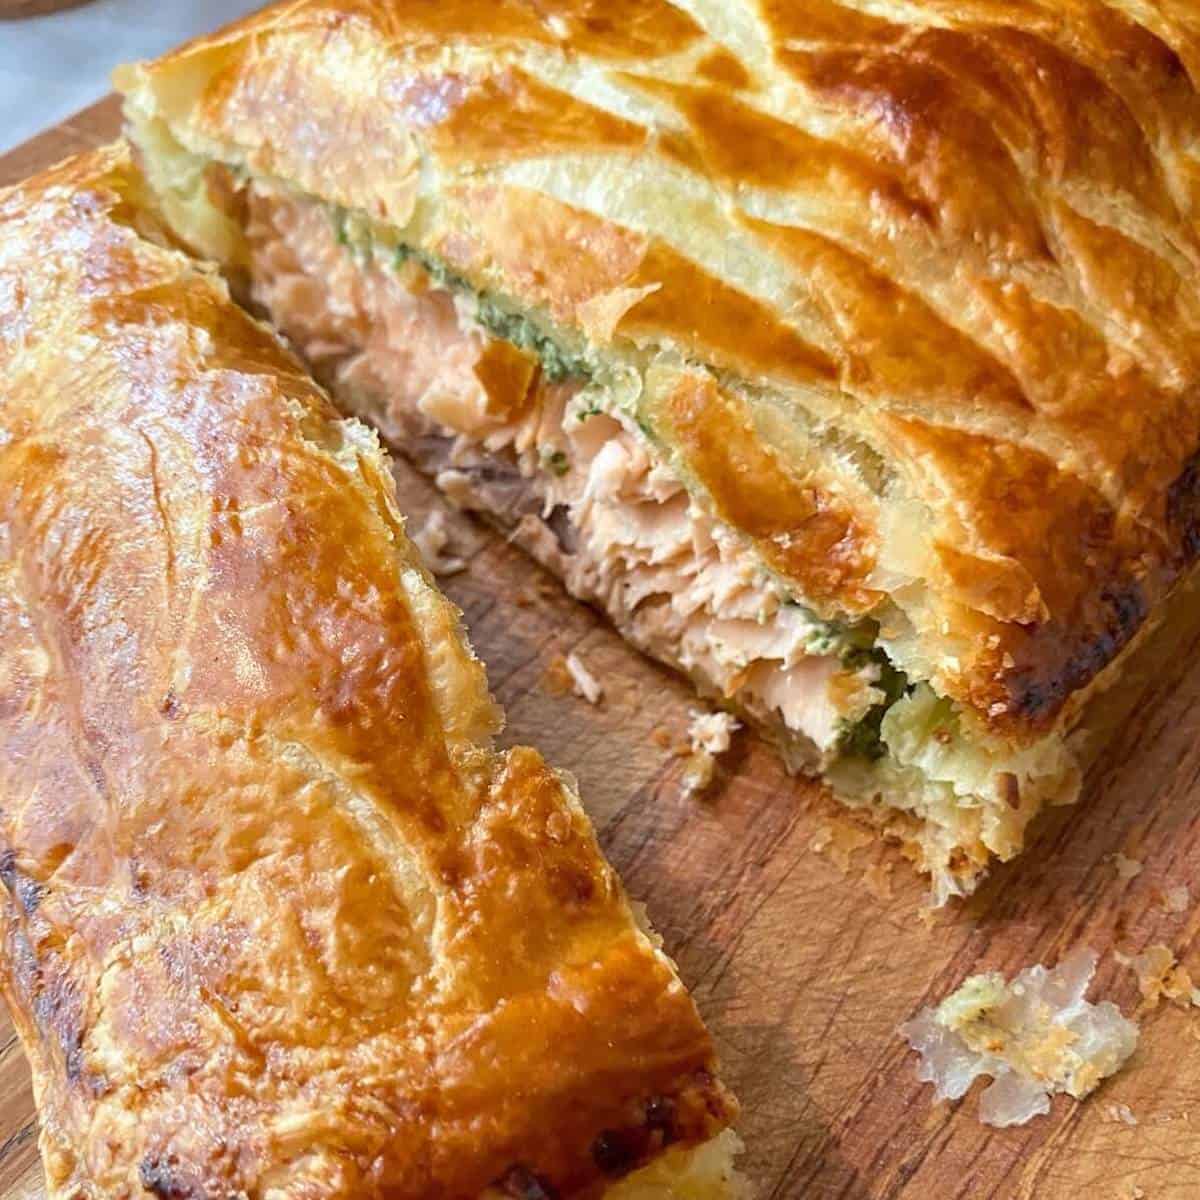 Salmon-en-croute-with-dill-cream-sauce-presented-on-a-serving-platter-for-a-dinner-party. 